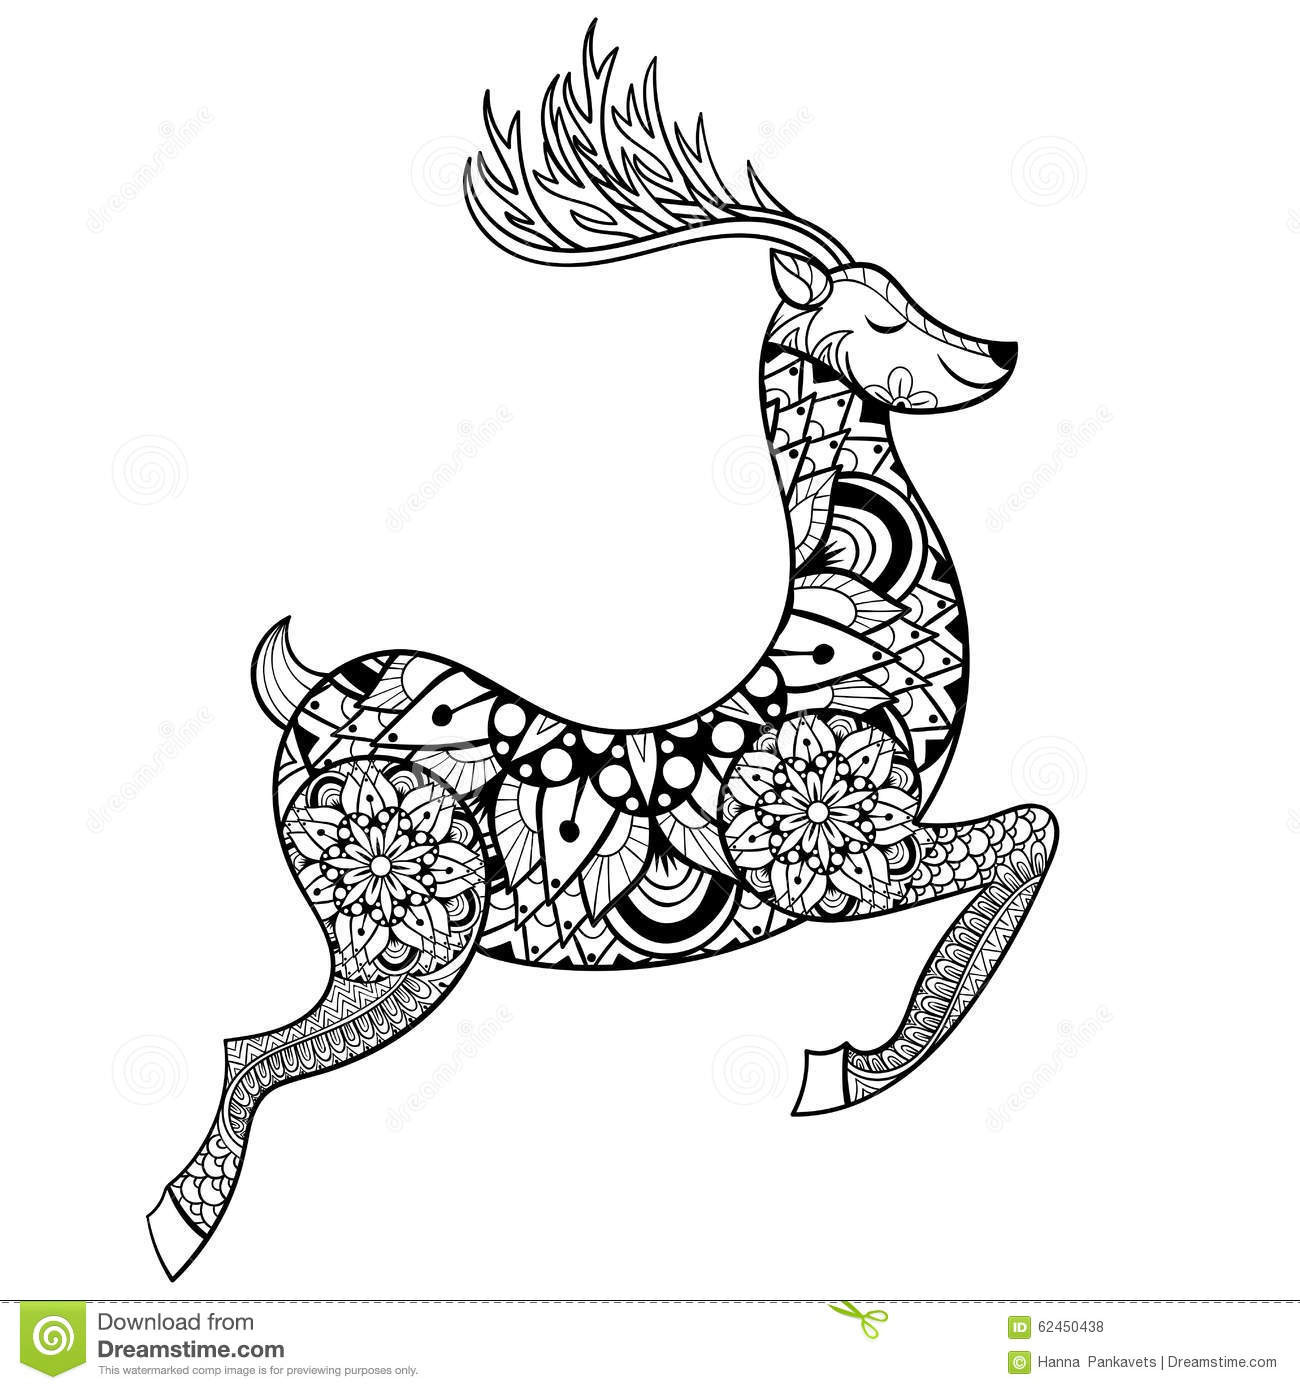 Deer Coloring Pages For Adults
 Zentangle Vector Reindeer For Adult Anti Stress Coloring